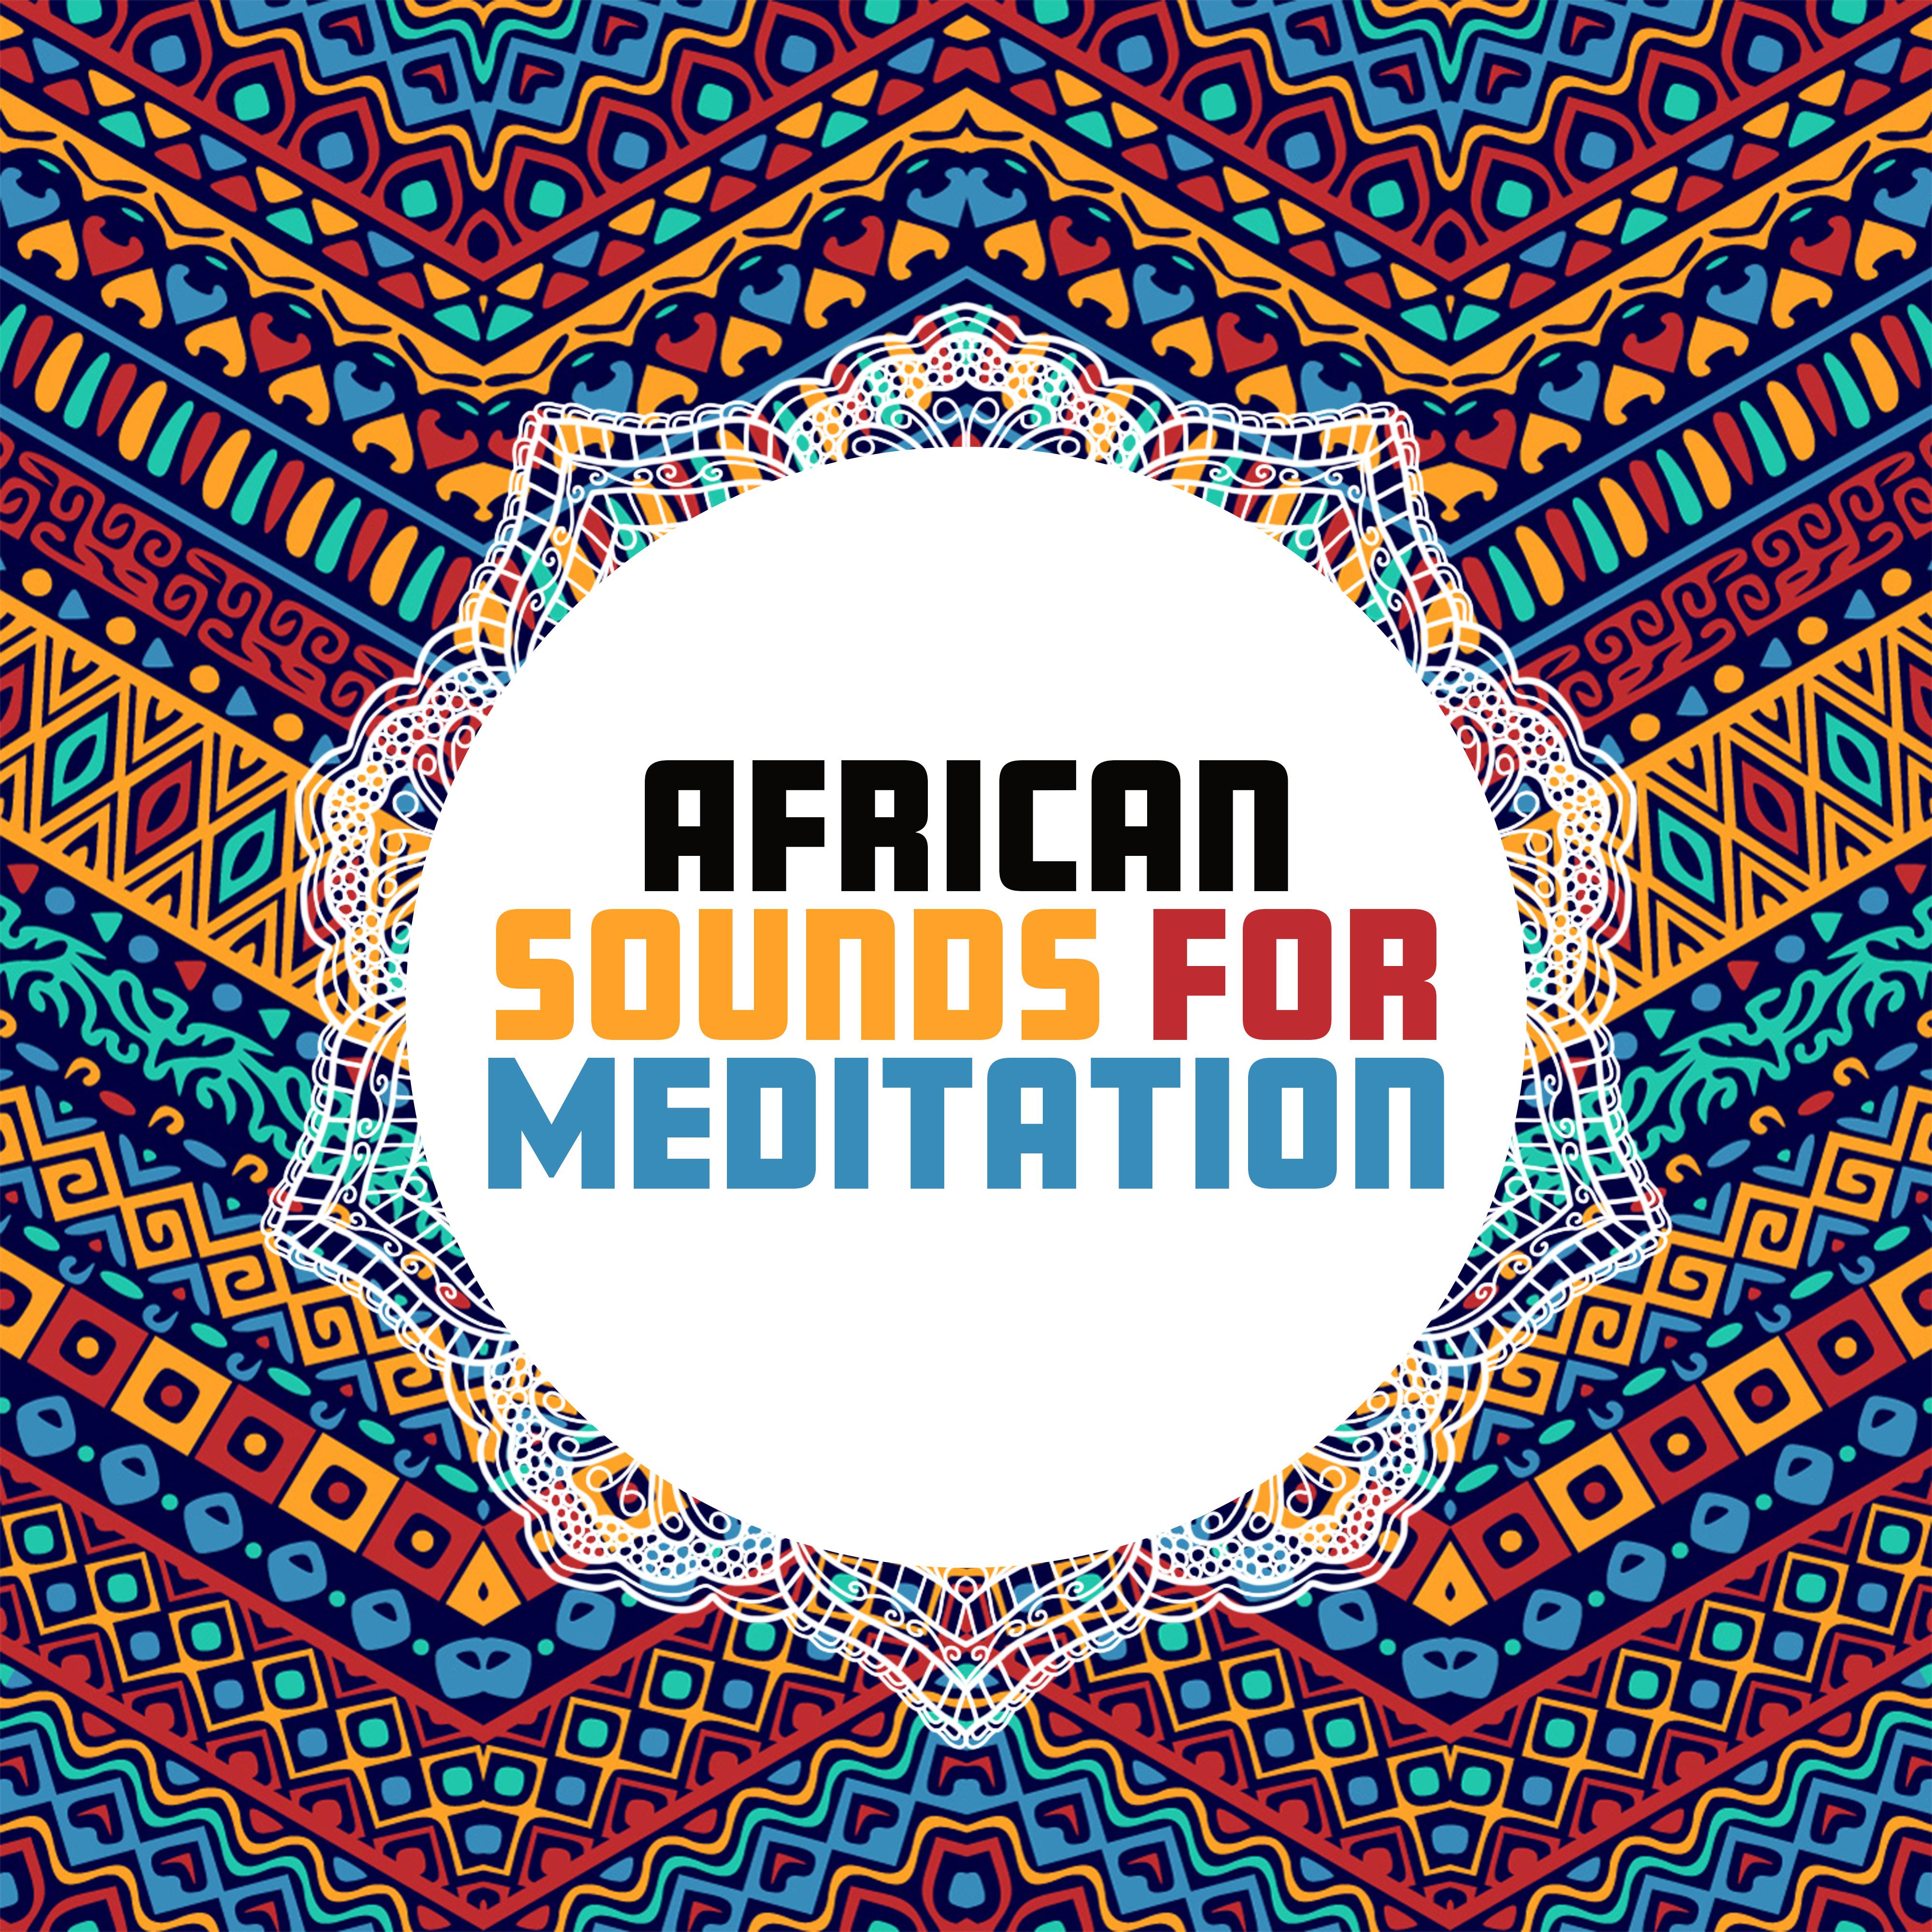 African Sounds for Meditation – New Age Music for Shamanic Meditation & Relaxation, Flute Music, Zen, African Rhythms to Calm Down